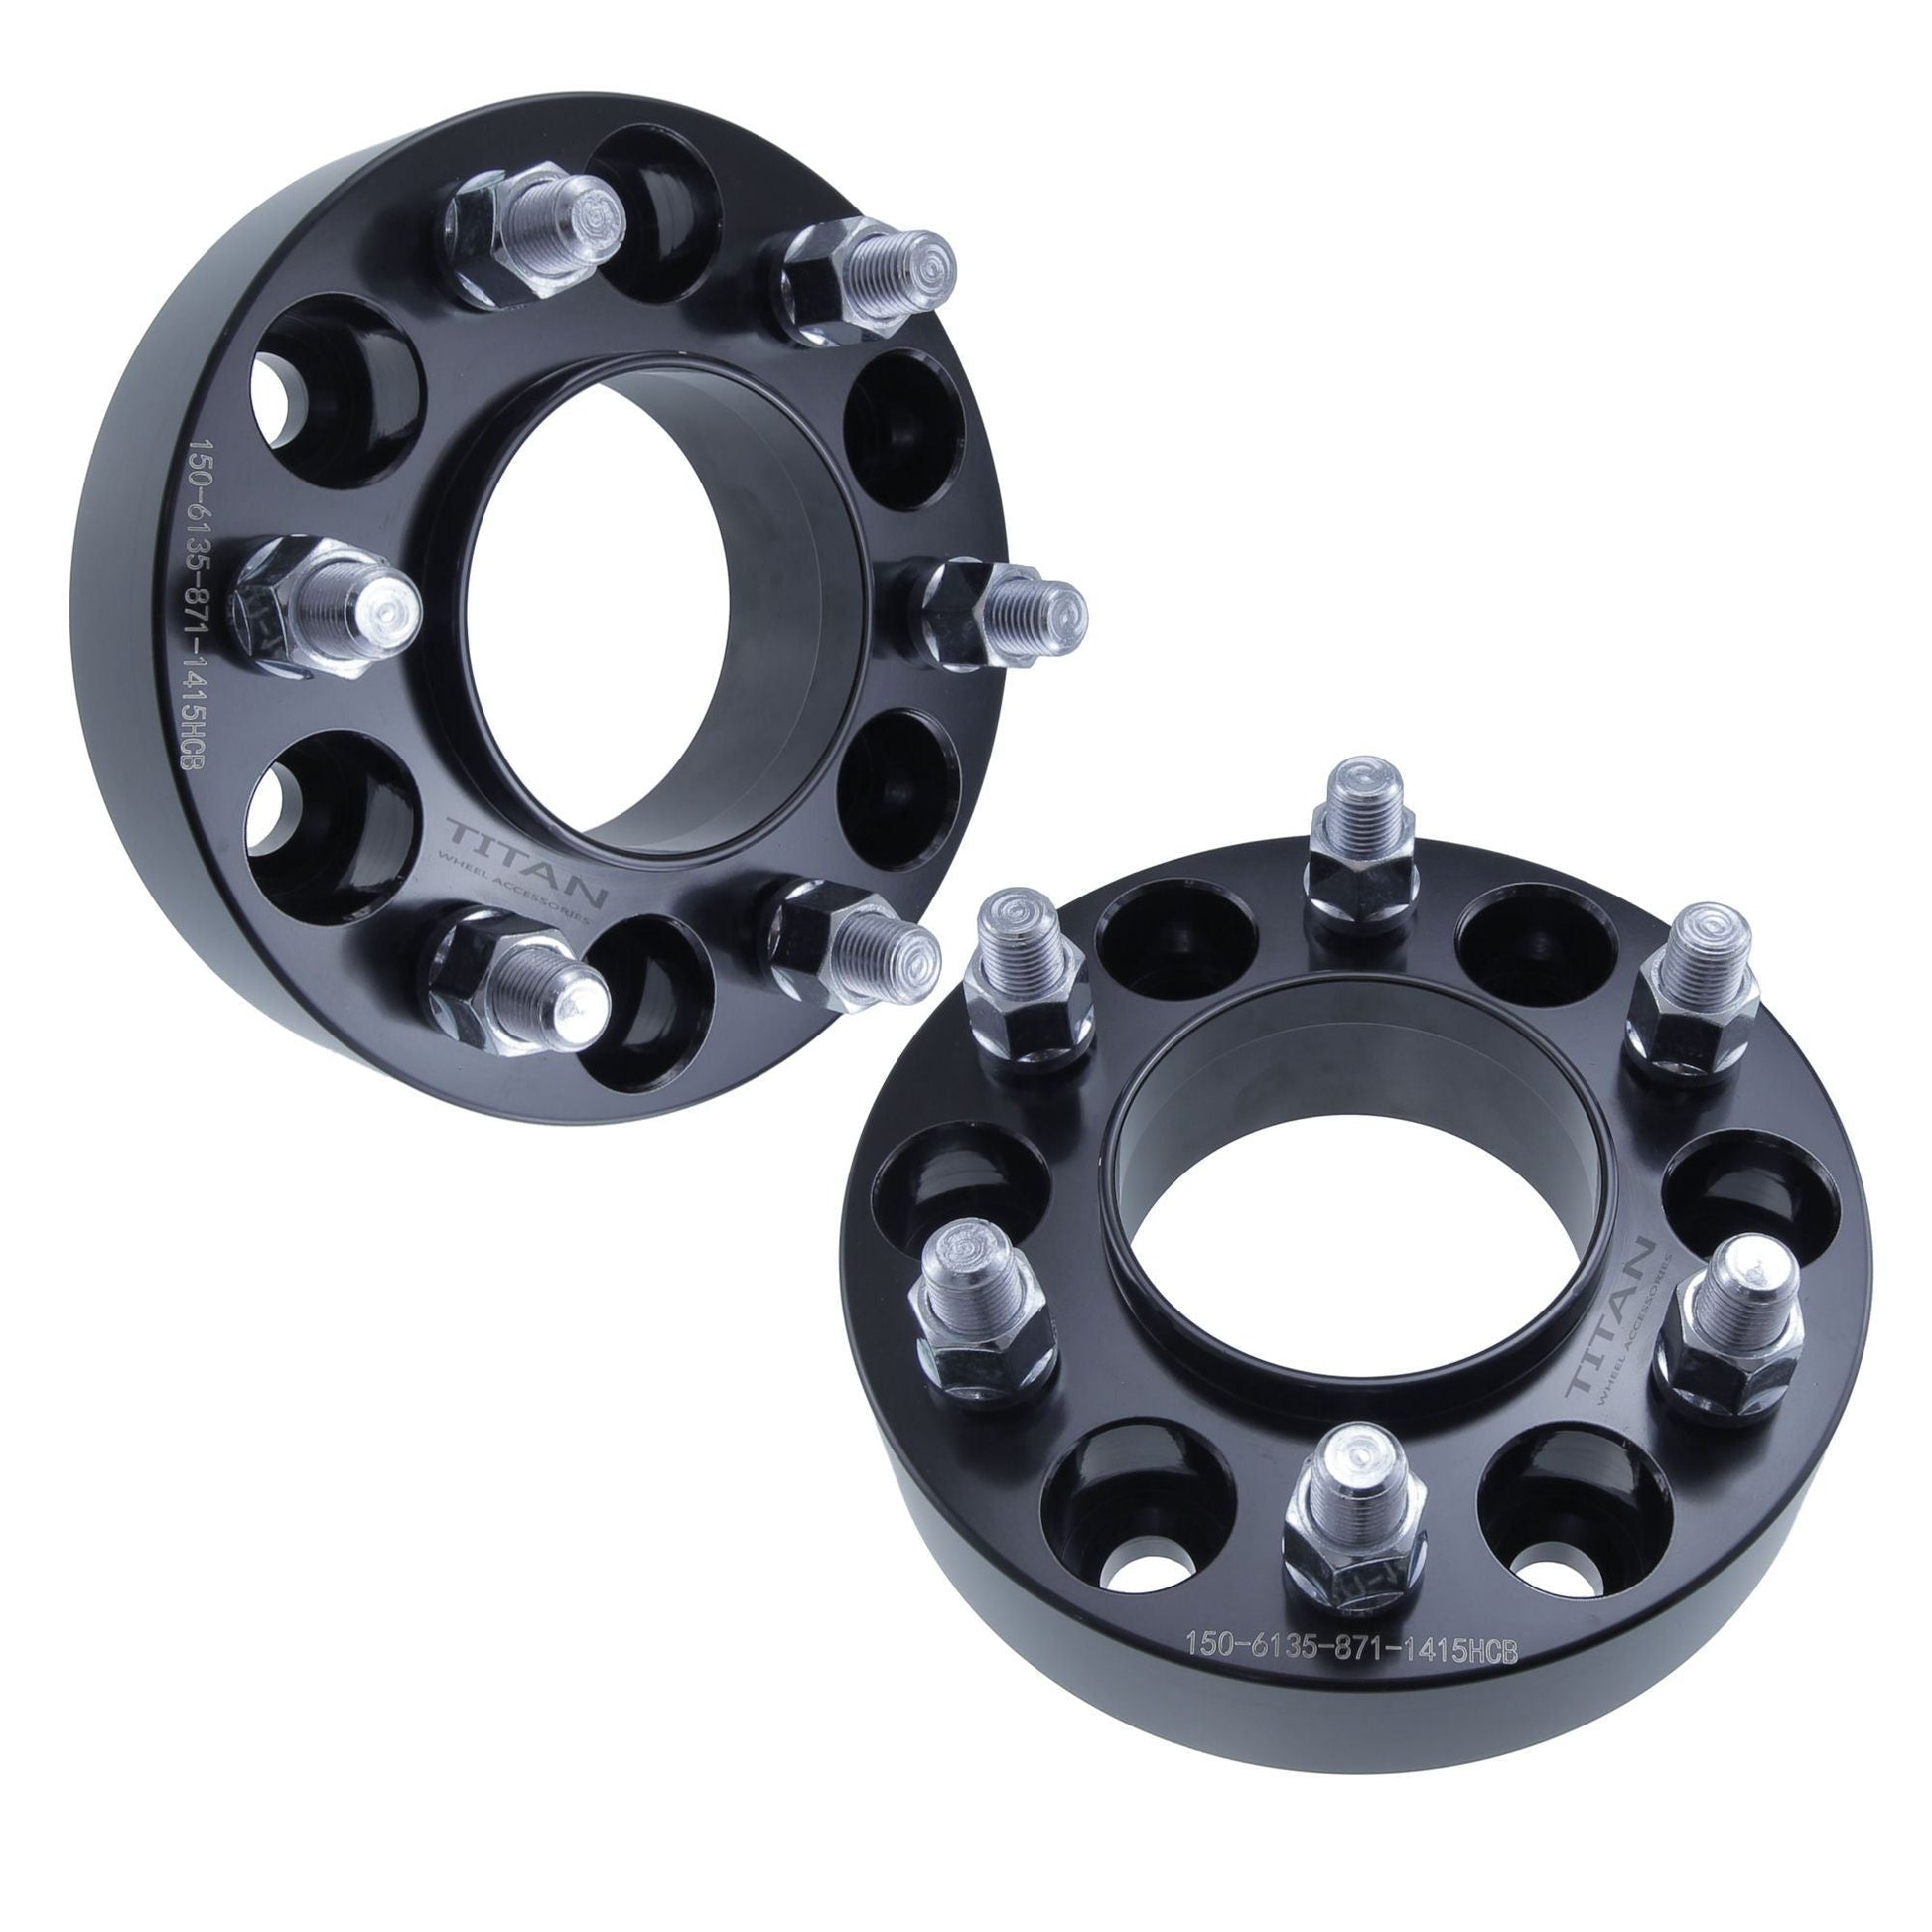 1.5" (38mm) Titan Wheel Spacers for Ford F150 2015+ | 6x135 | 87.1 Hubcentric |14x1.5 Studs |  Set of 4 | Titan Wheel Accessories